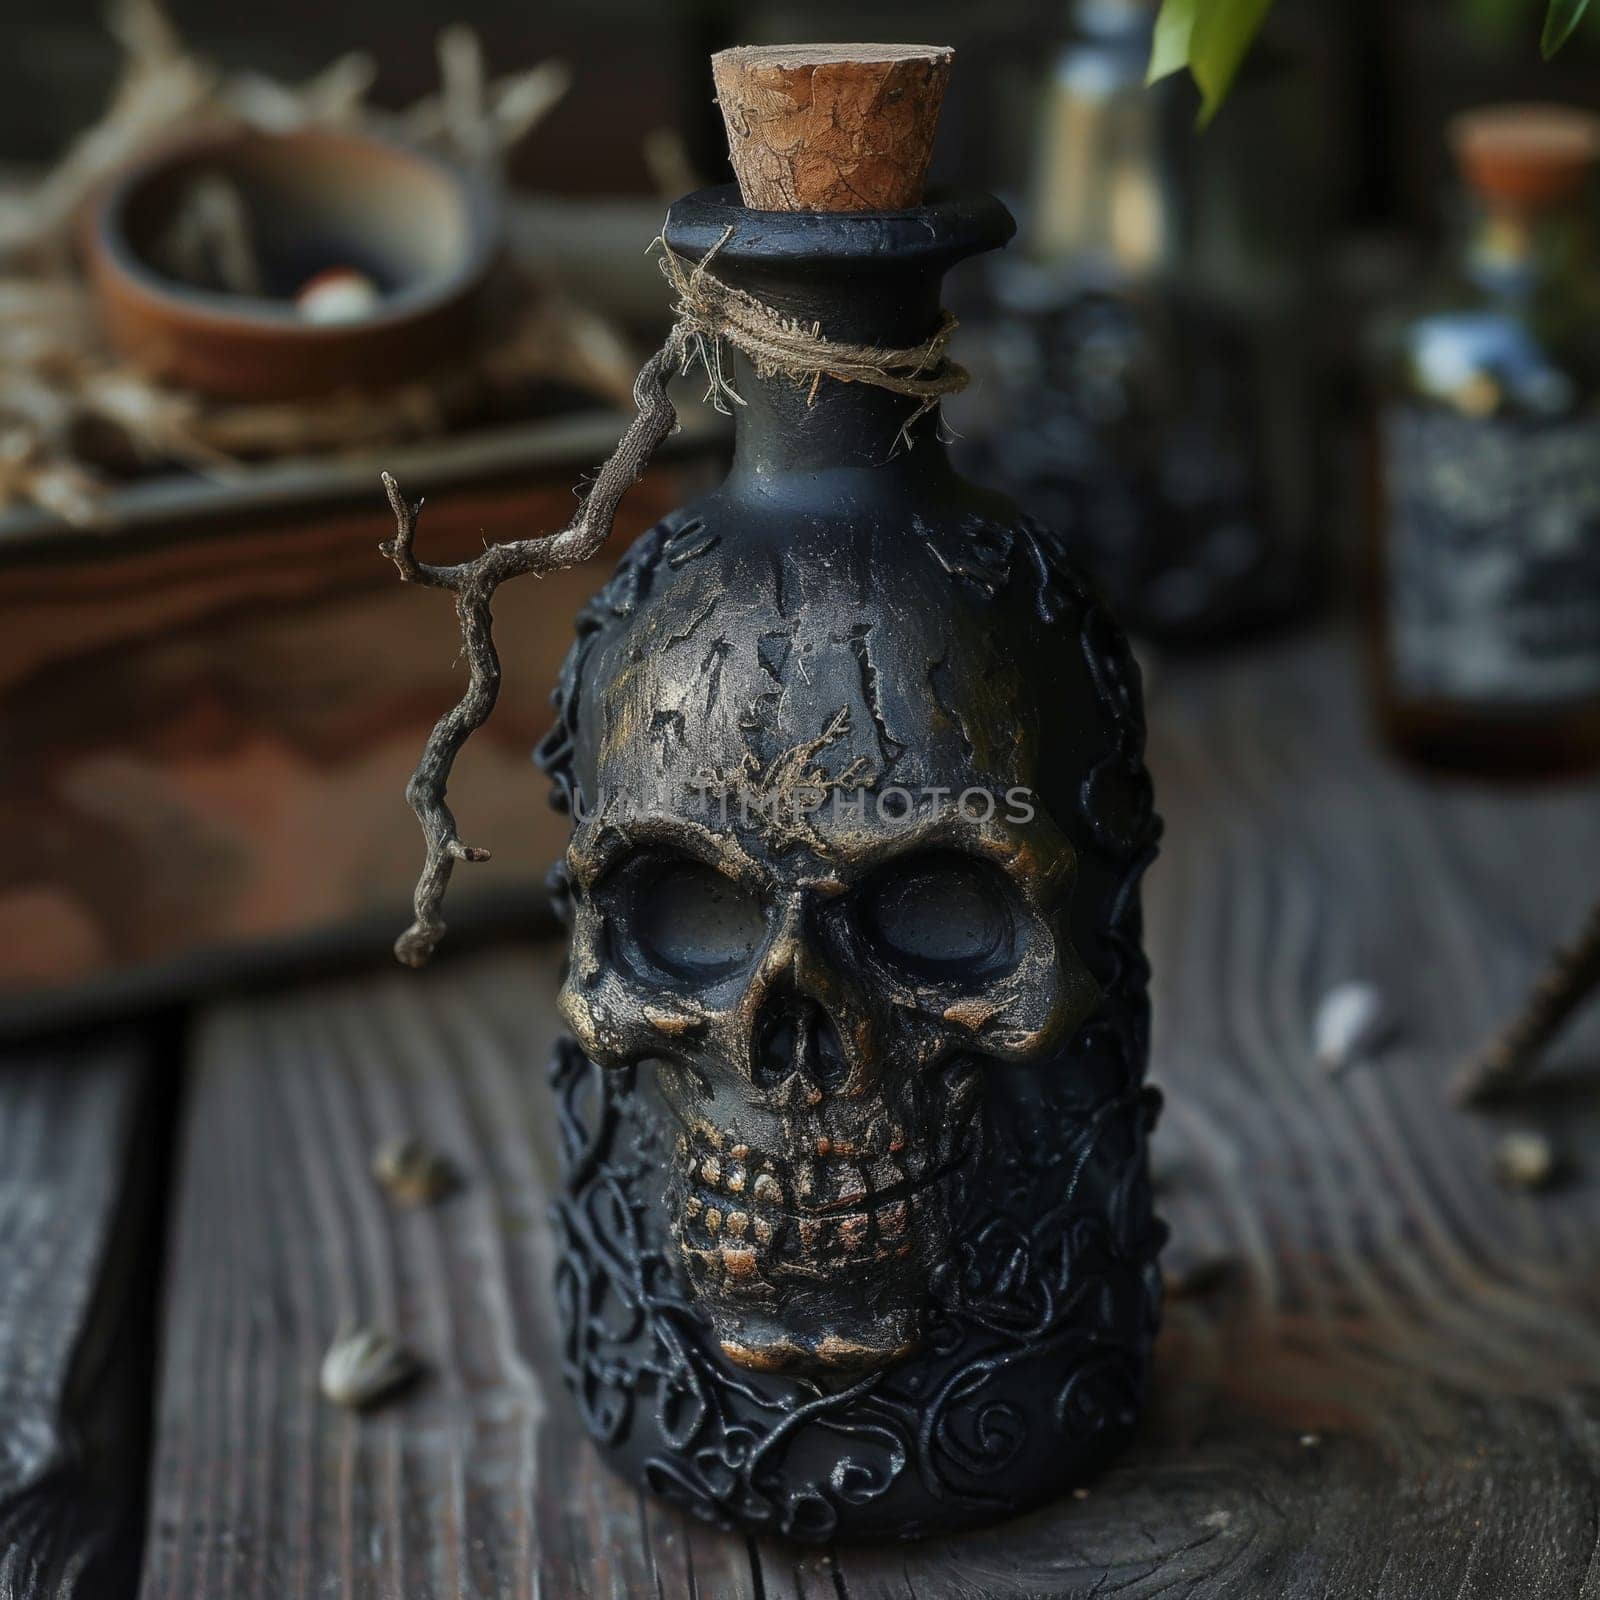 Decorative black skull-shaped bottle with a cork, set against a rustic backdrop. by sfinks